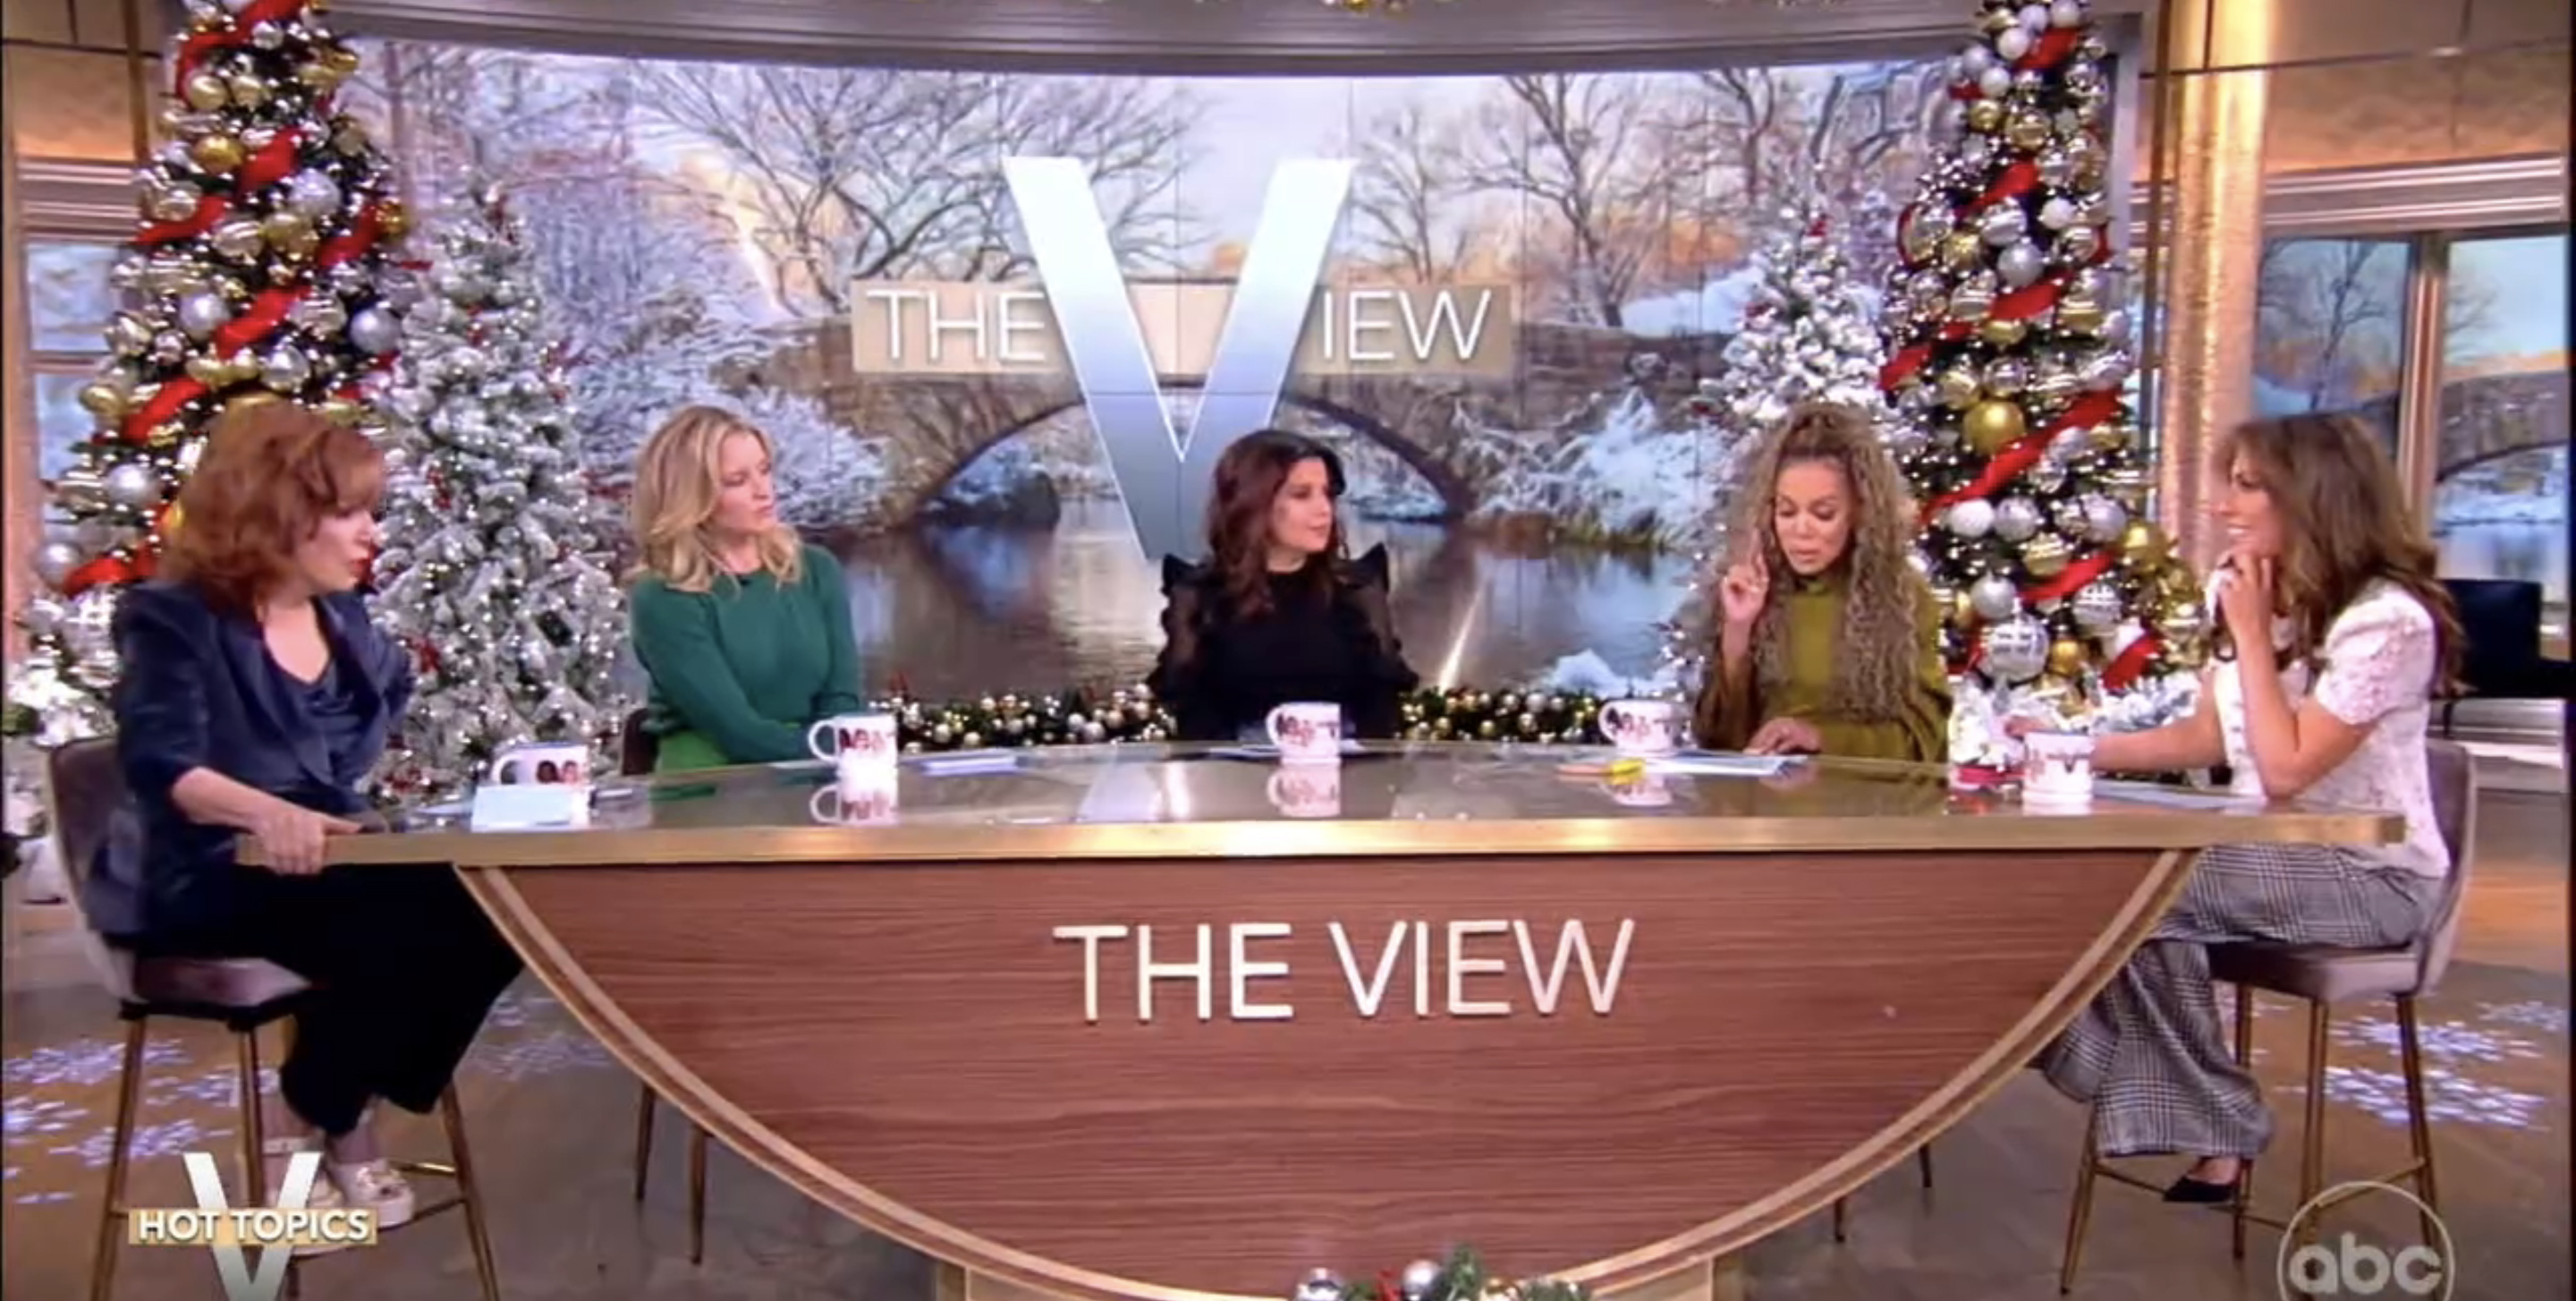 The View will return with all new live episodes on Tuesday, January 2